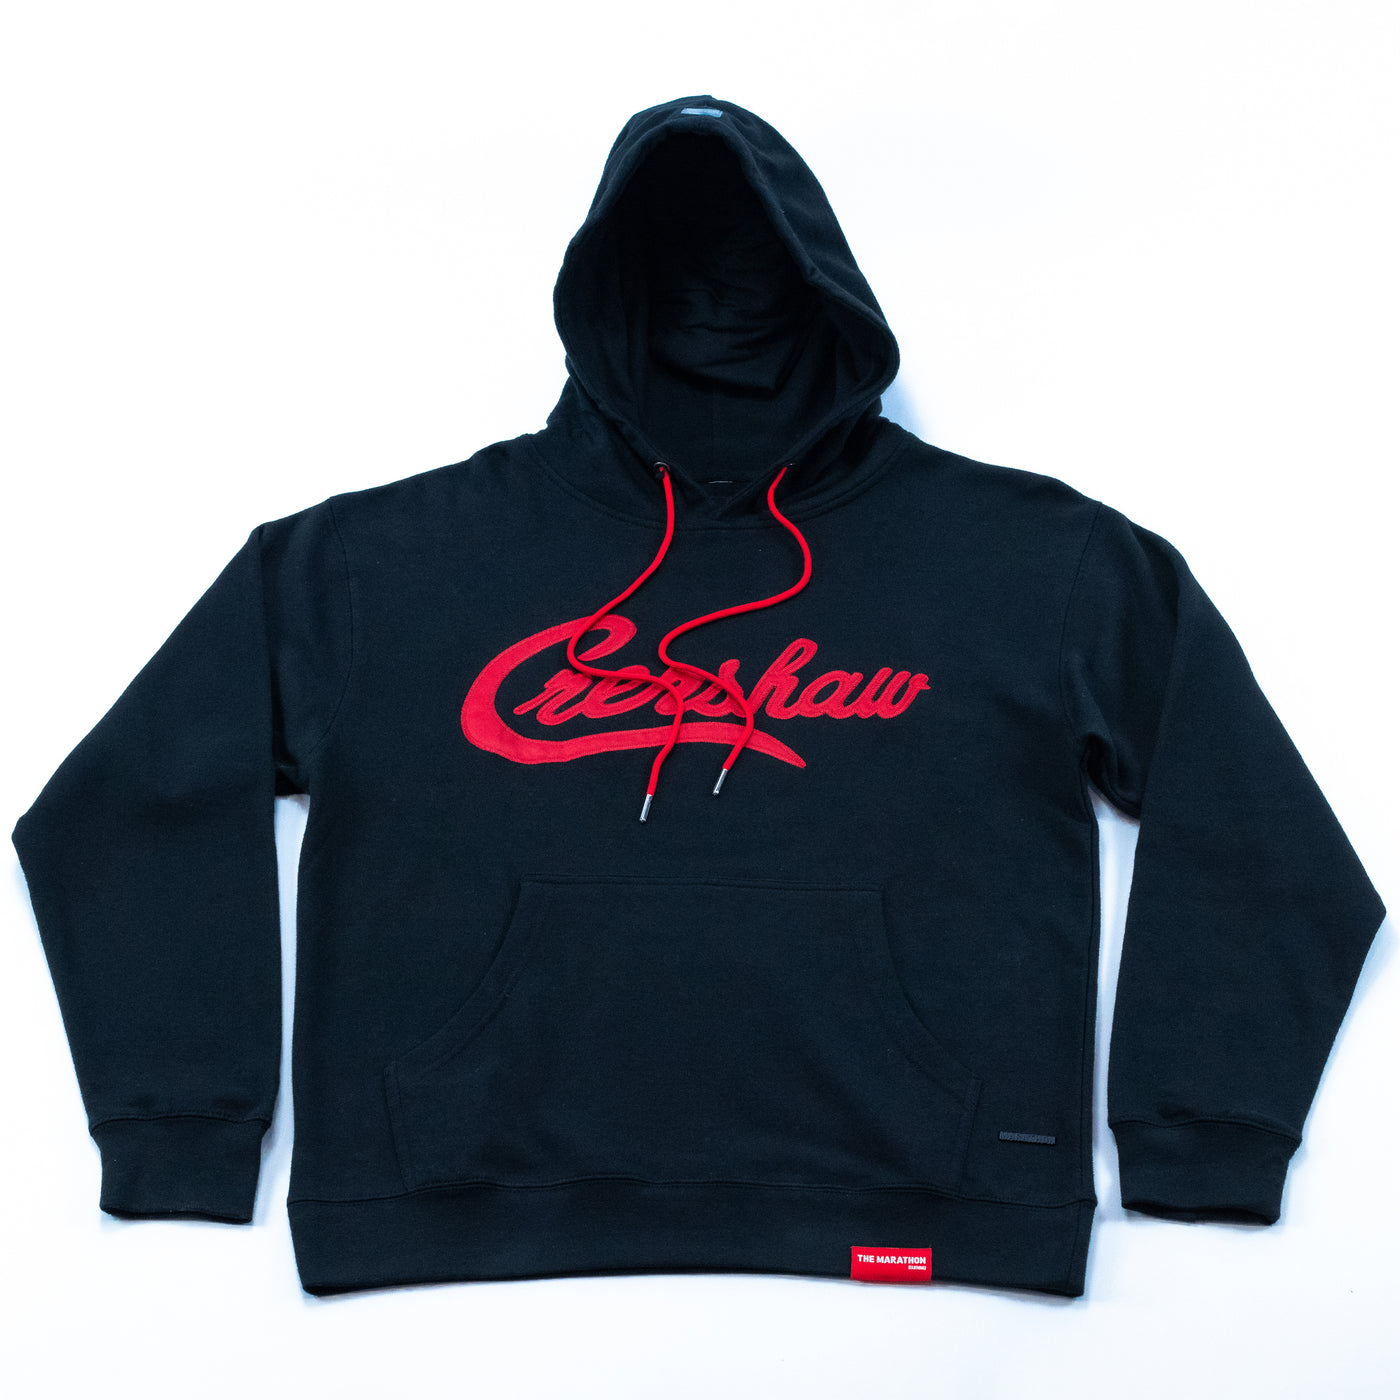 Crenshaw Limited Edition Hoodie - Red/Black